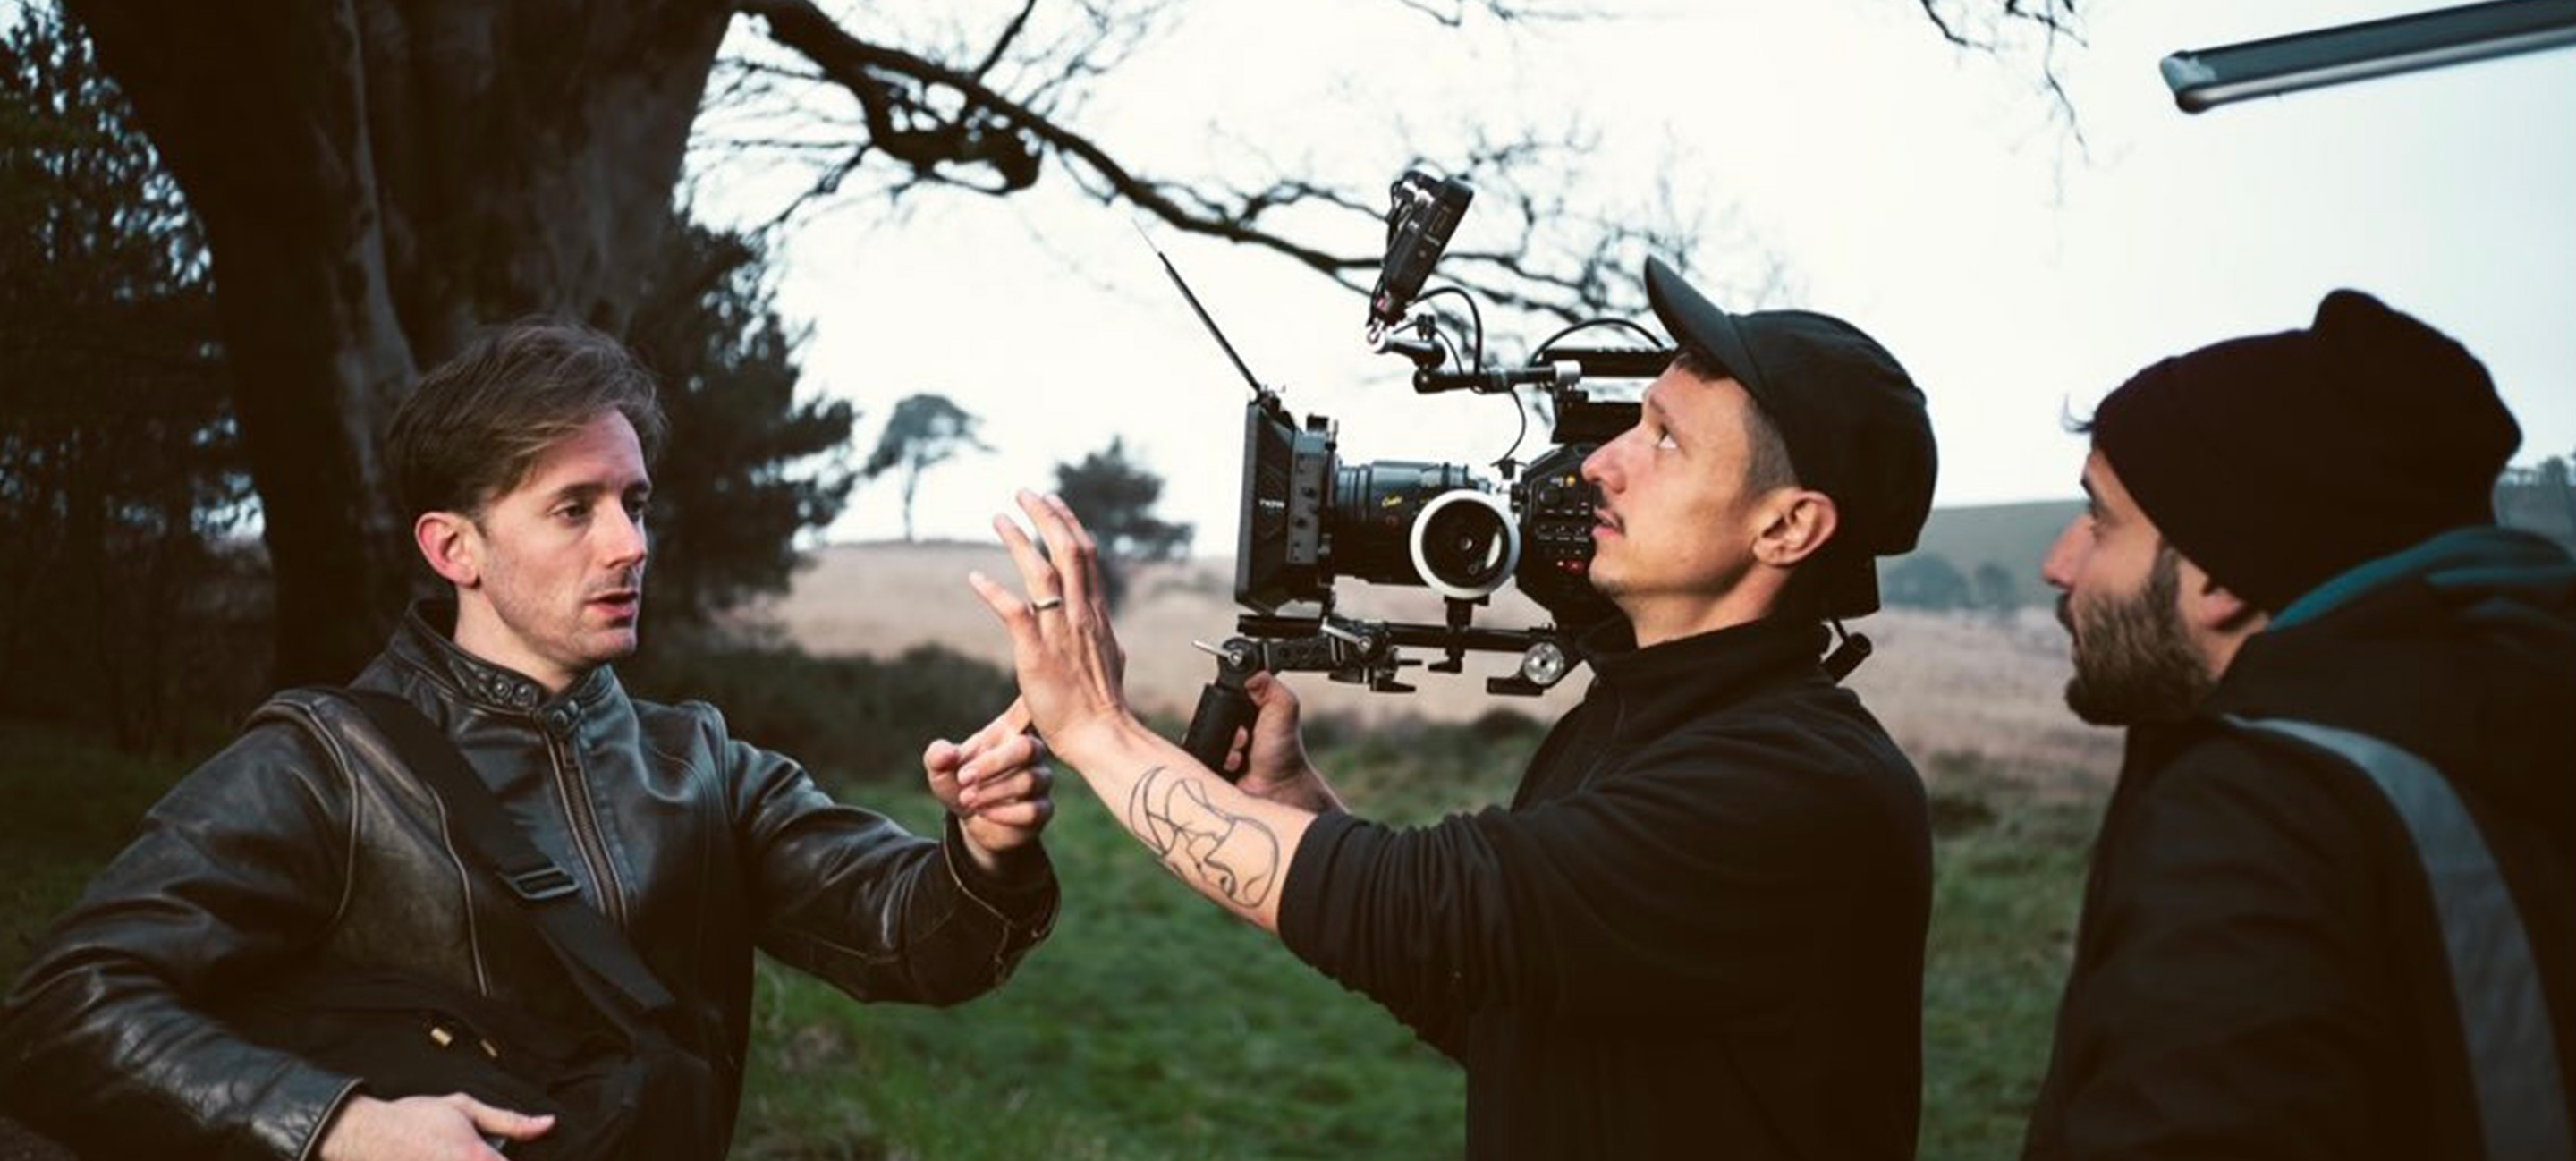 From the UK to Canada: Q&A with Director of Photography Sam Coombes on his big move